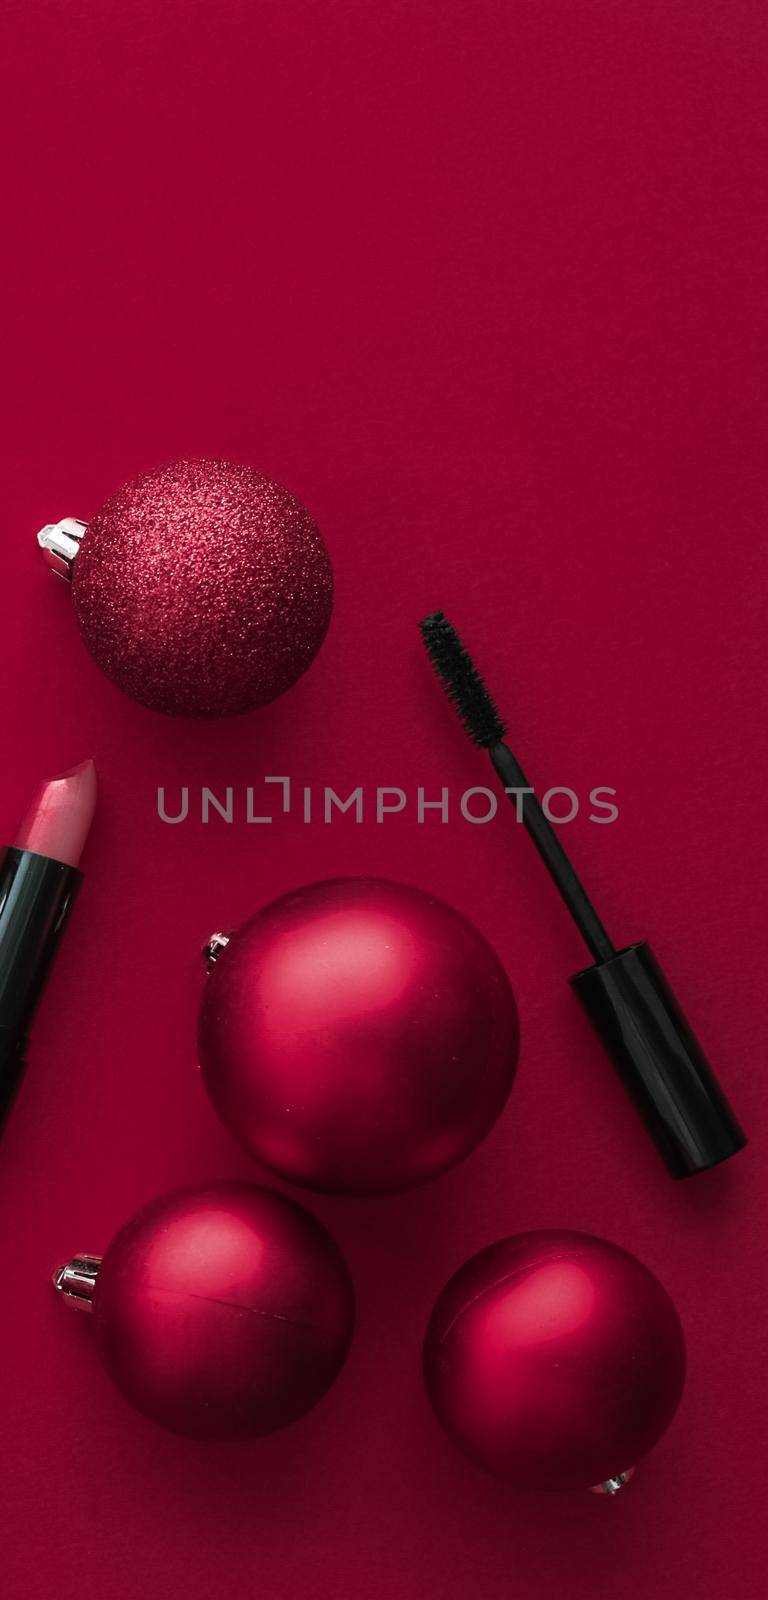 Make-up and cosmetics product set for beauty brand Christmas sale promotion, luxury wine flatlay background as holiday design by Anneleven